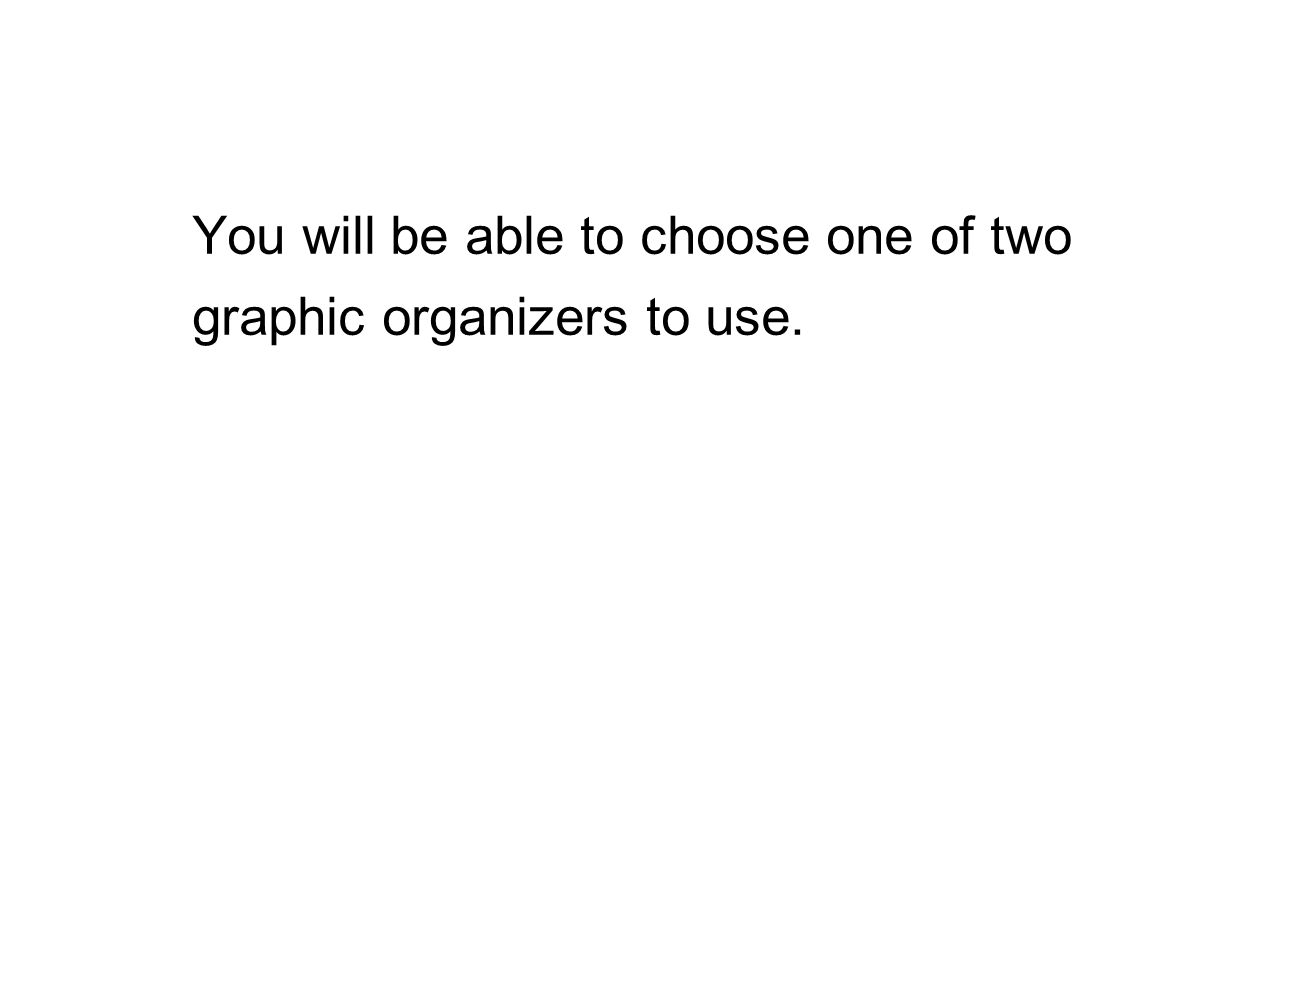 You will be able to choose one of two graphic organizers to use.